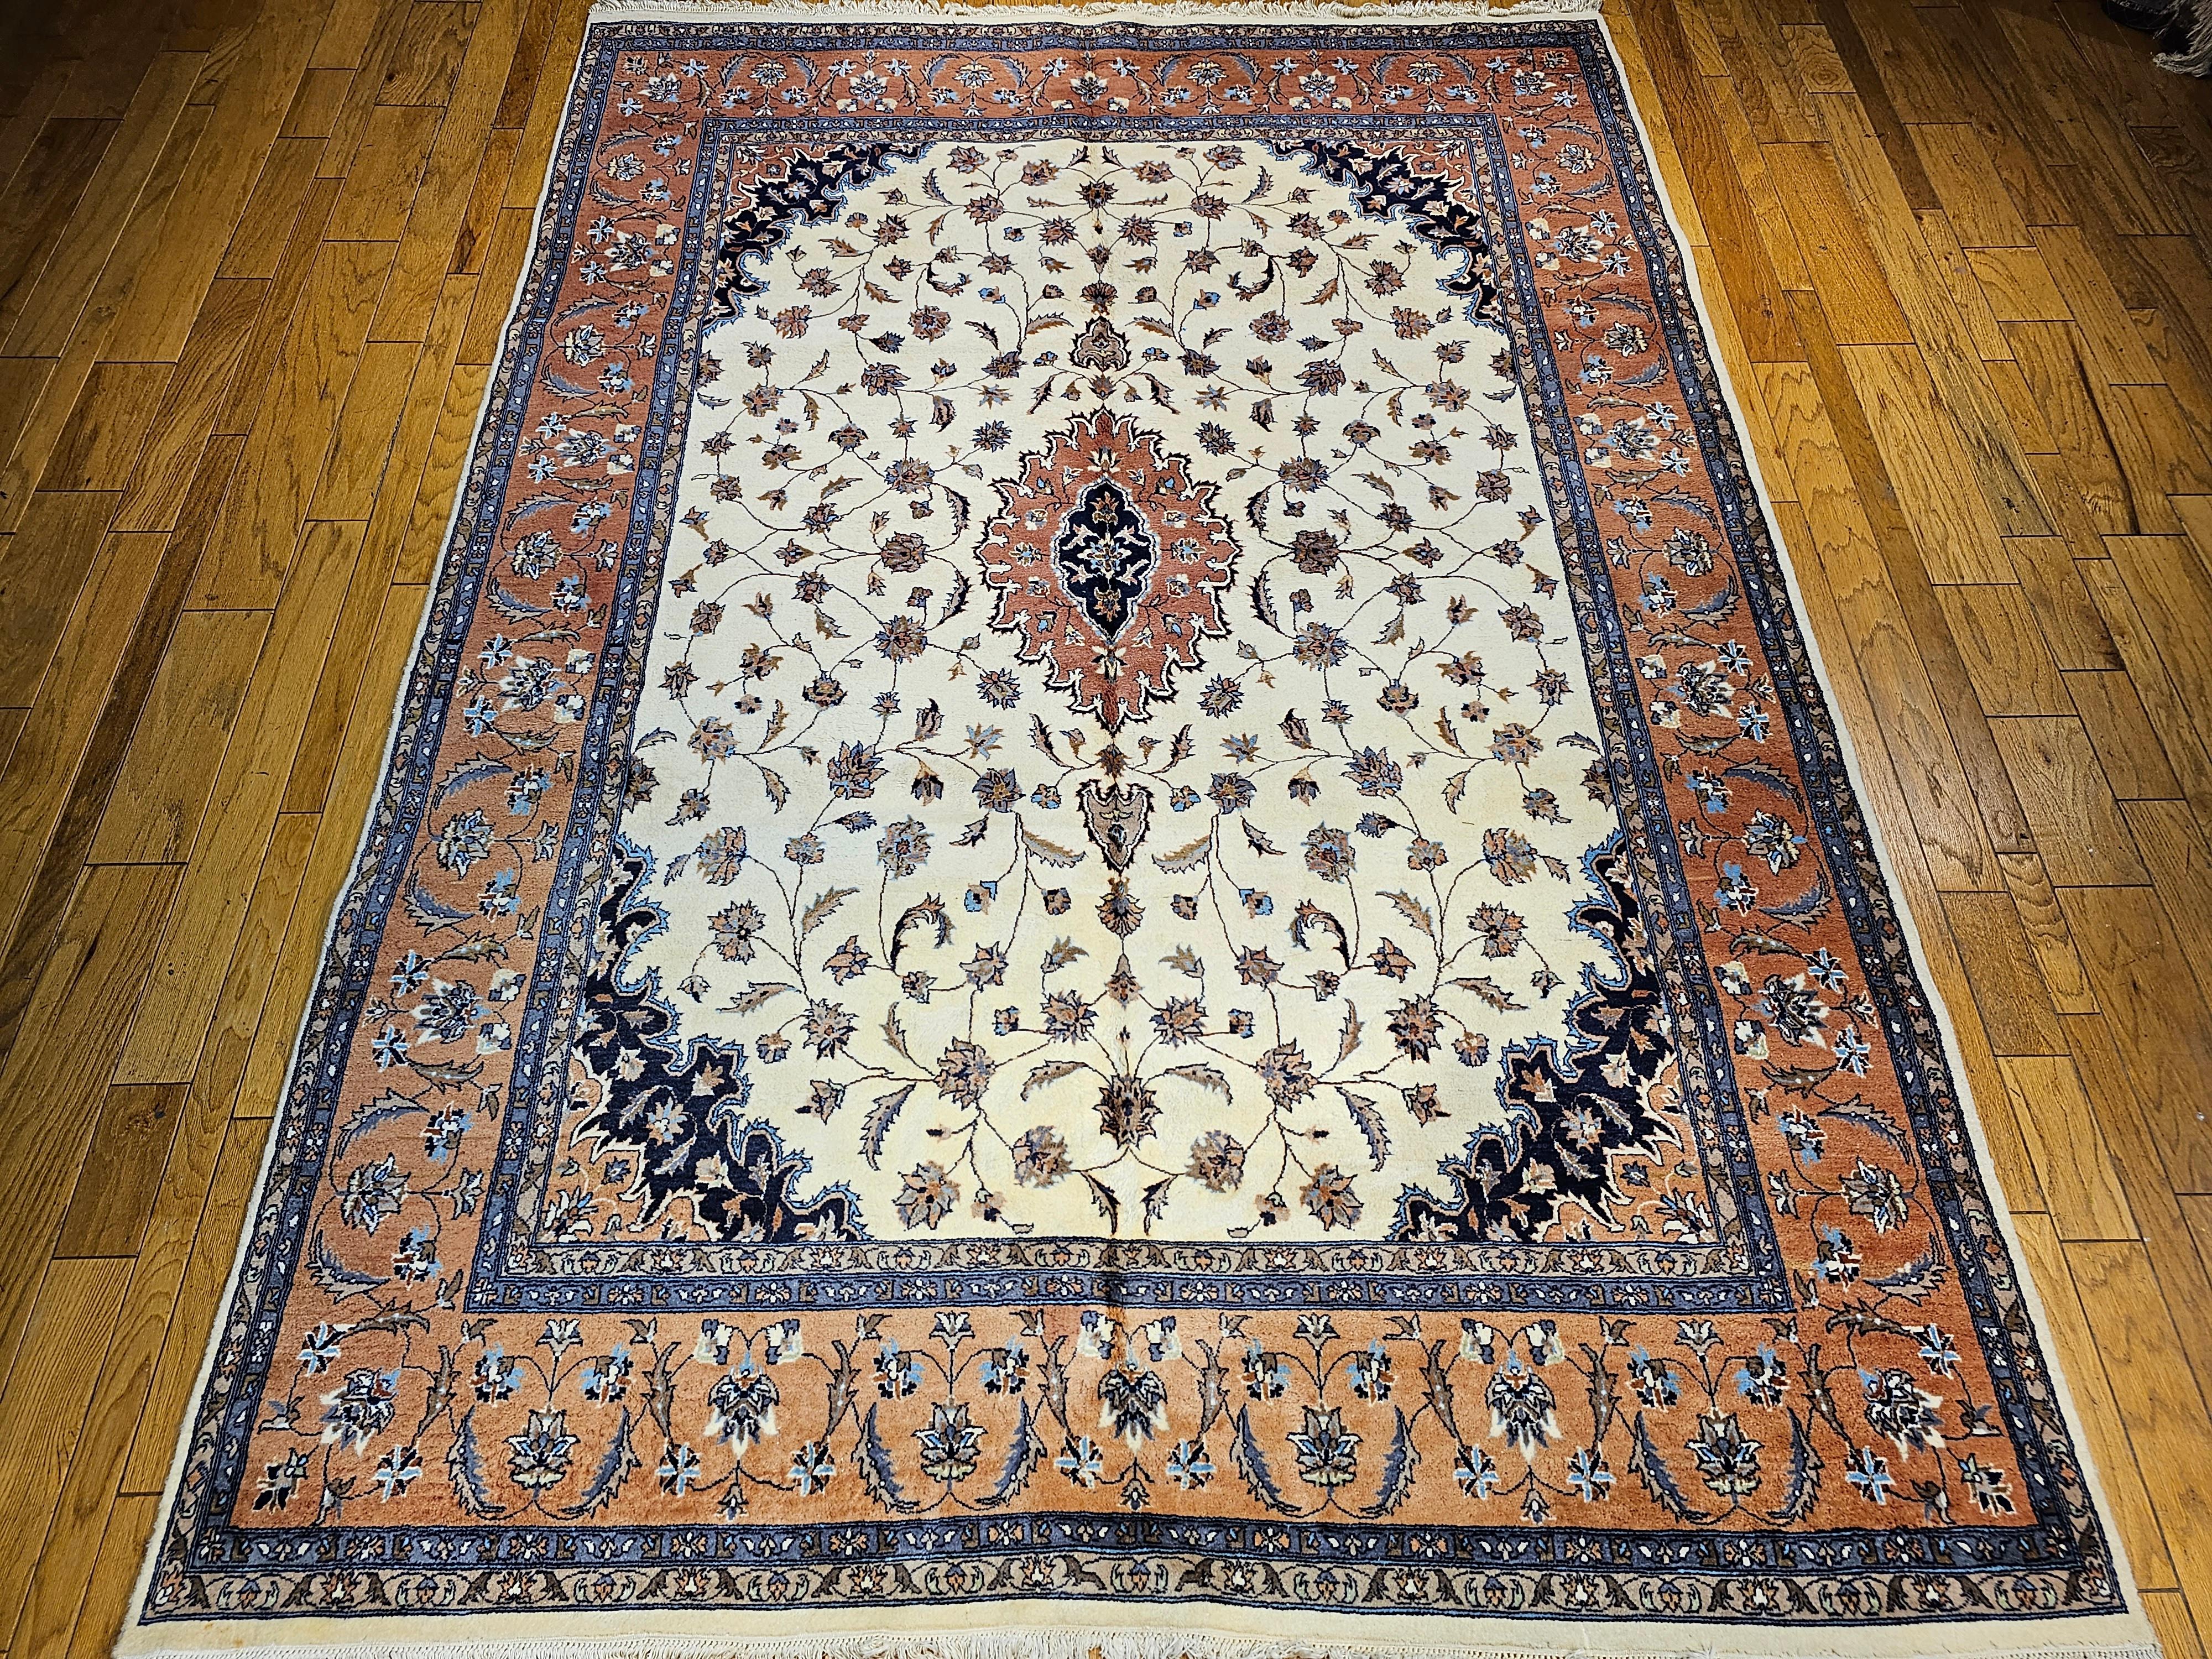 Vintage hand-knotted Tabriz design room size rug in a floral pattern in ivory, terracotta red, navy blue and brown from the 4th quarter of the 1900s. The rug has an ivory color field with a terracotta or rust color border.  The central medallion is